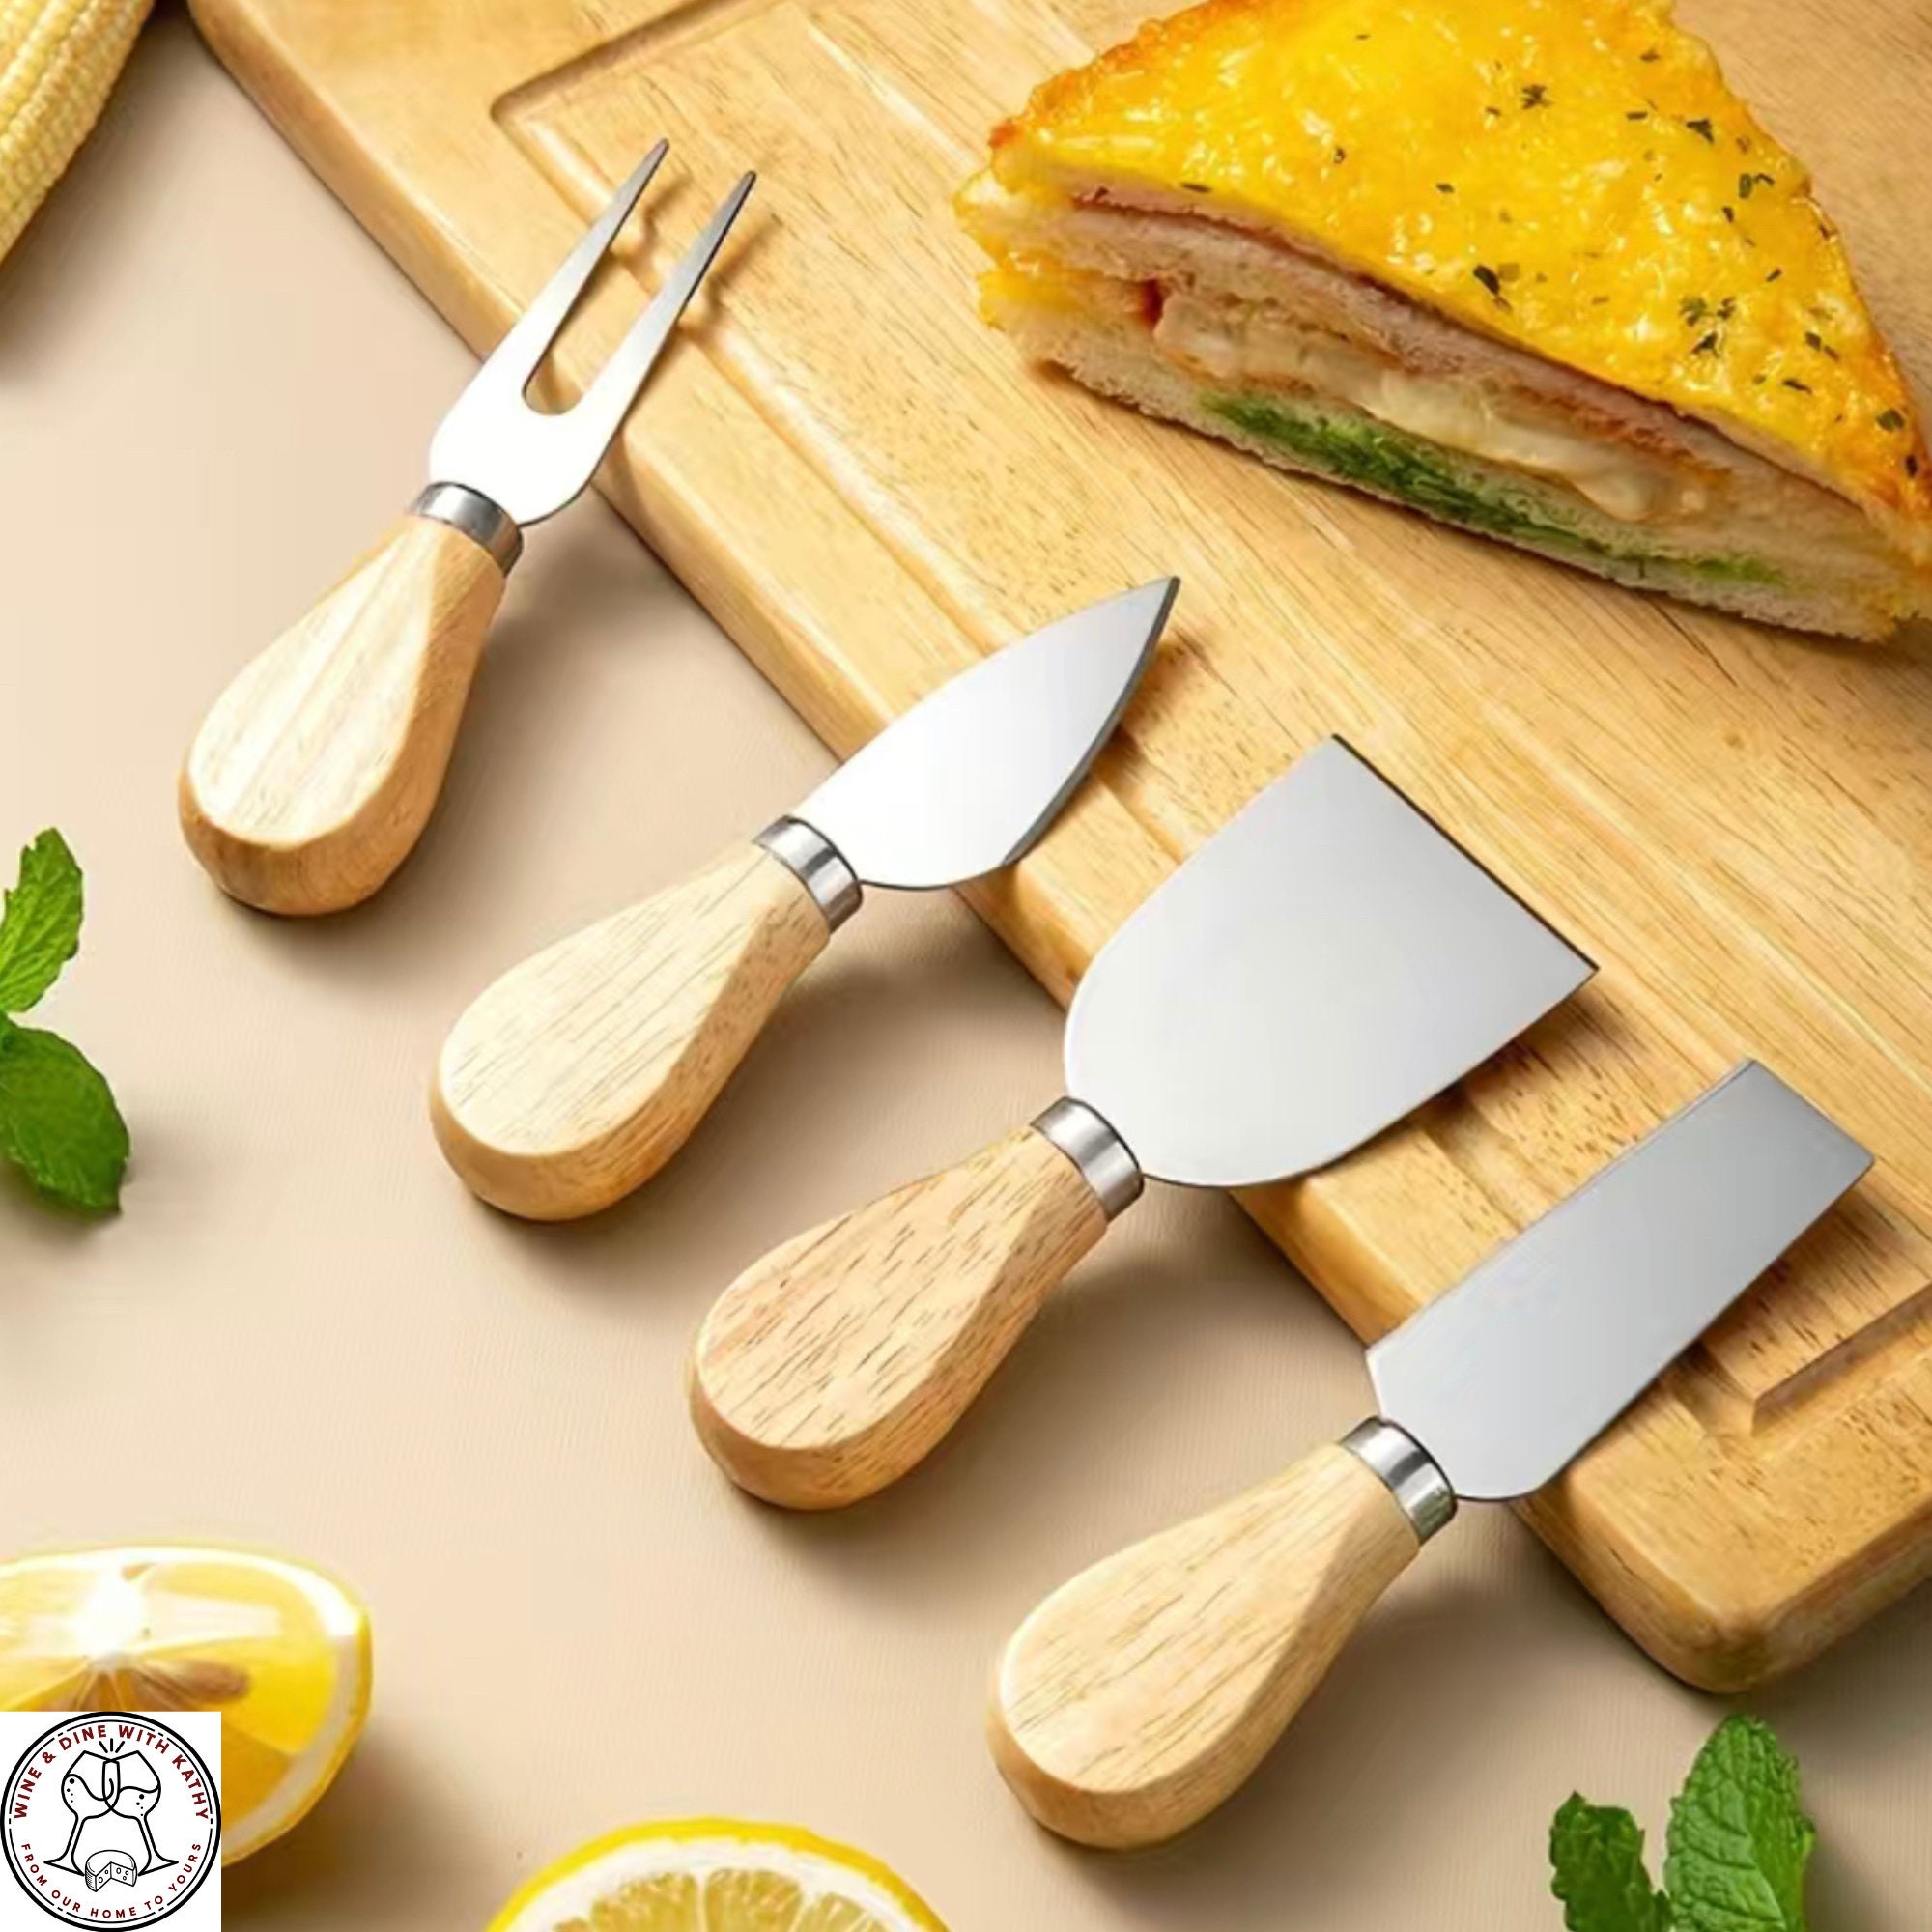 Engraved Personalized Set of 4 Wood Cheese Knives Charcuterie Knives  Cutting Knives Spreaders Cheese Knife, Shaver, Fork and Spreader 